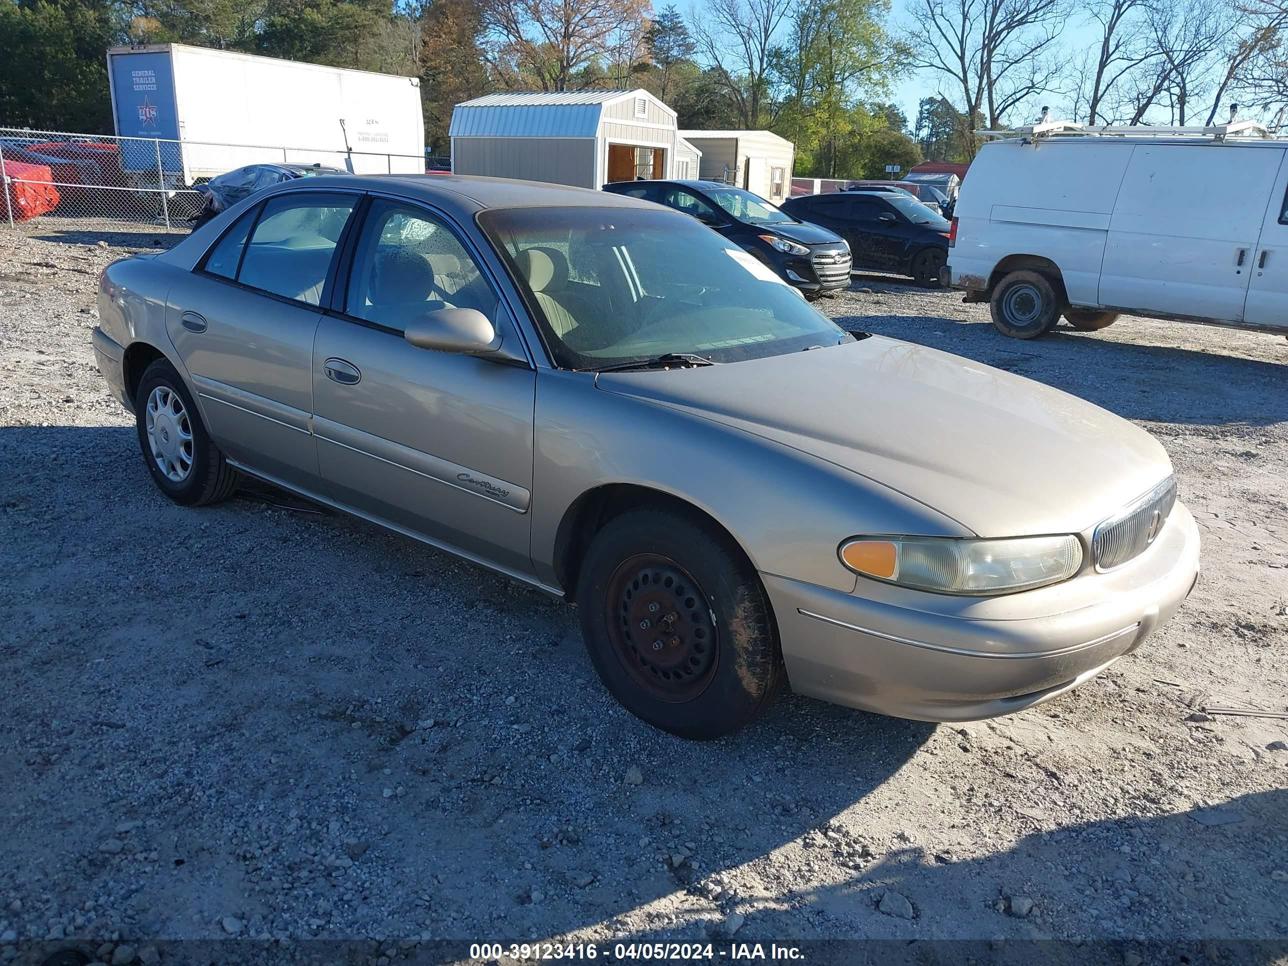 vin: 2G4WS52J511136536 2G4WS52J511136536 2001 buick century 3100 for Sale in 30052, 125 Old Highway 138, Loganville, Georgia, USA